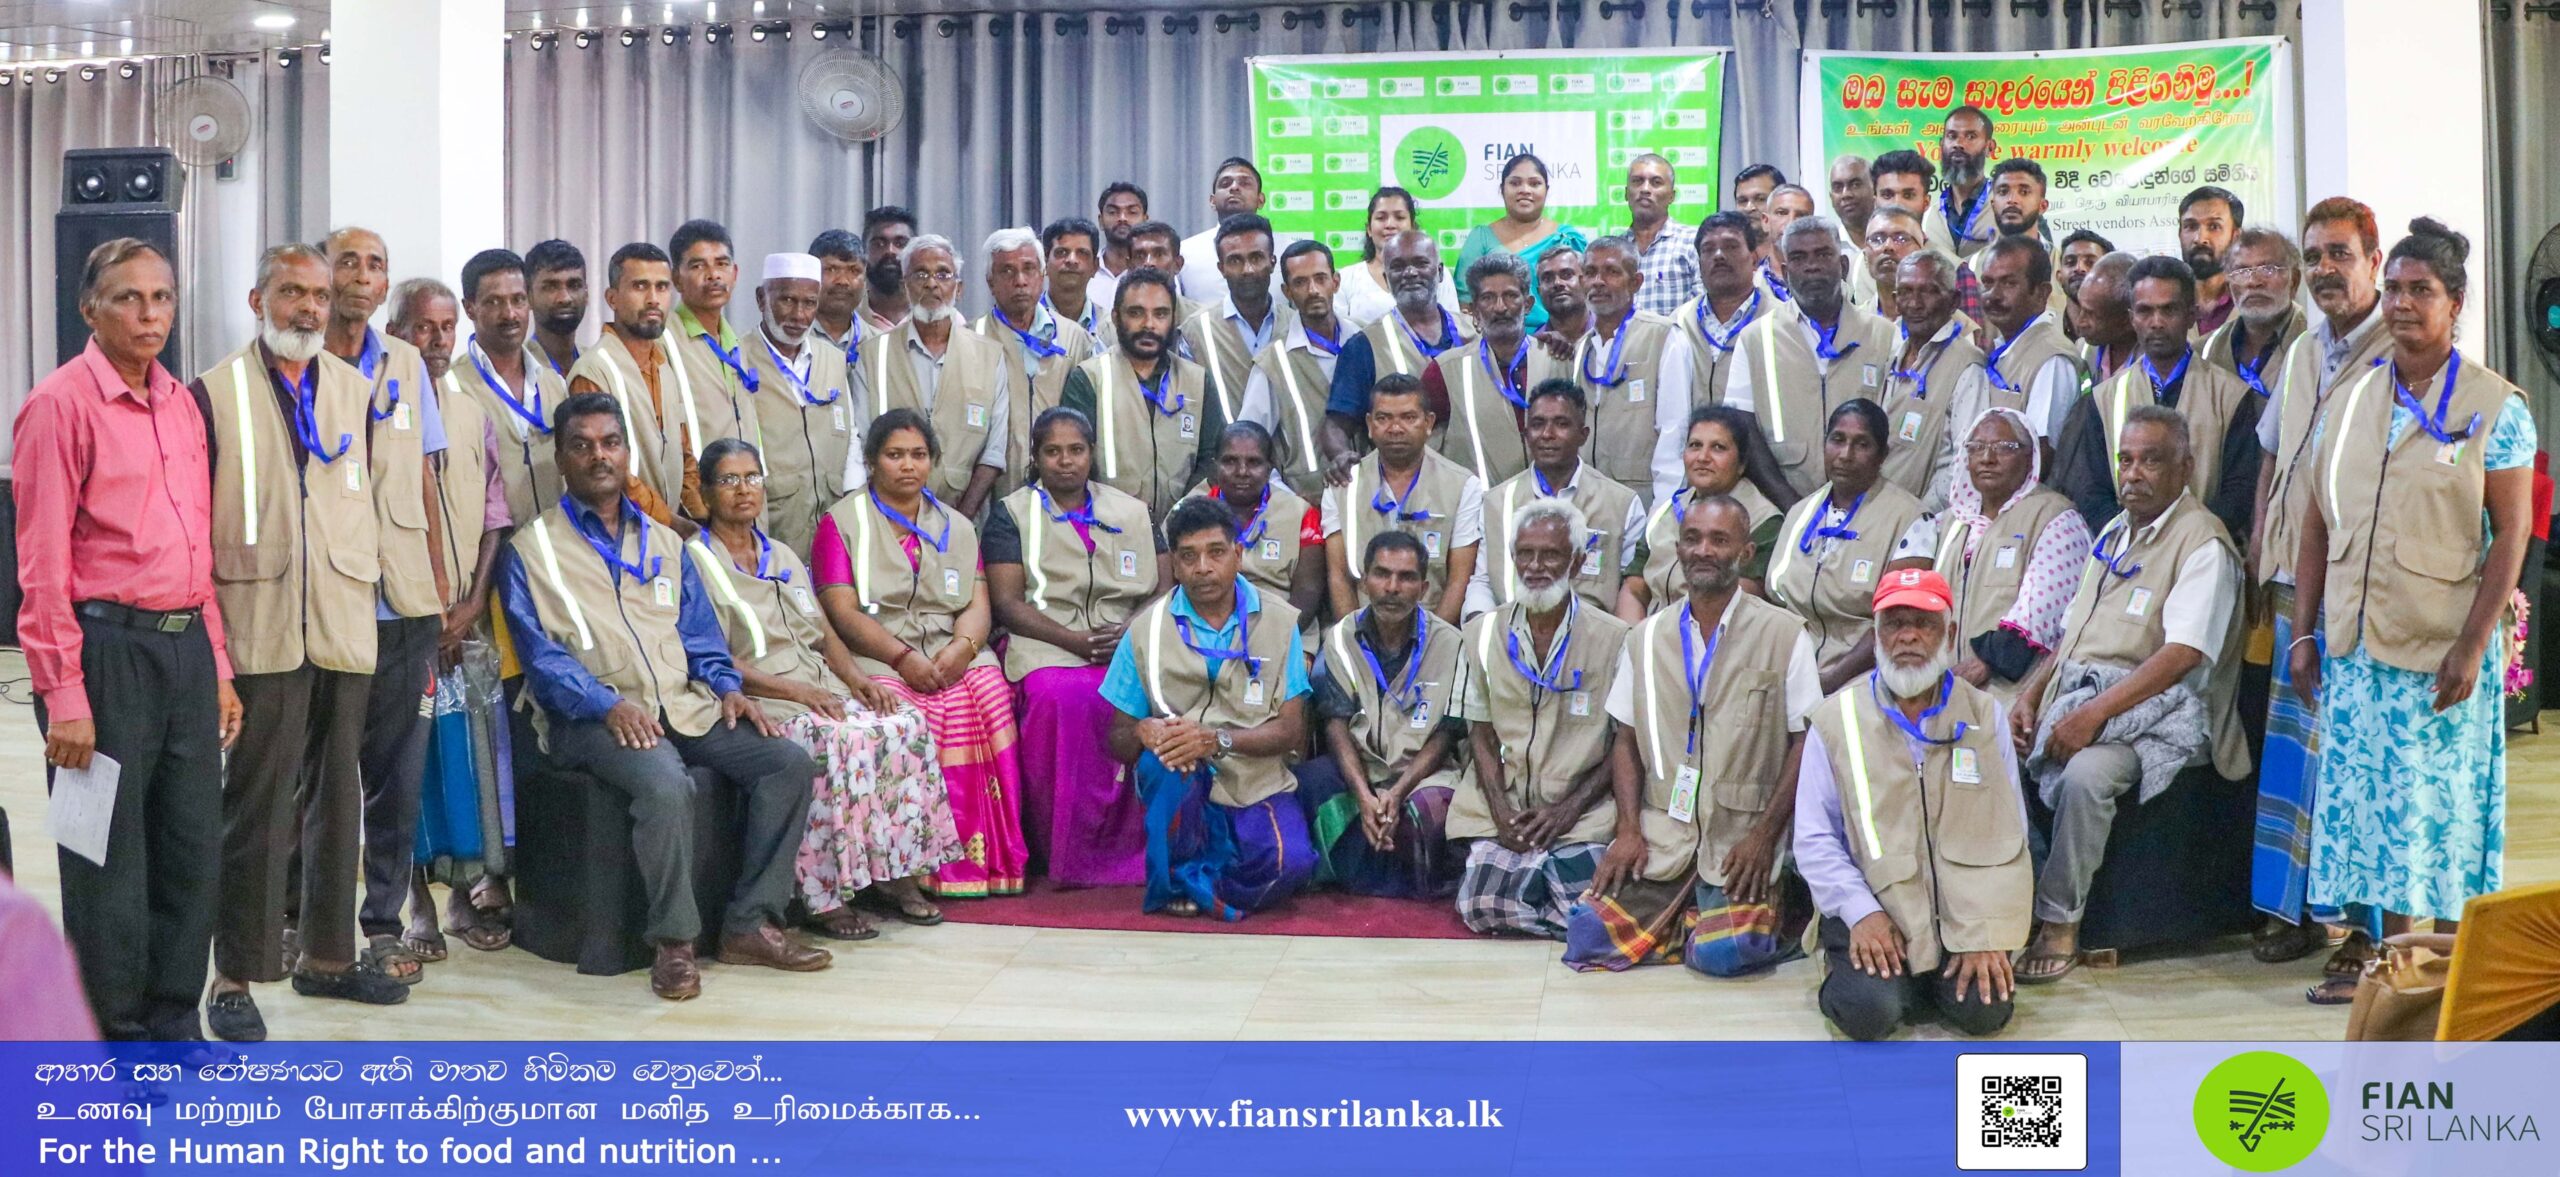 The official jacket and identity card giving ceremony to Street Vendors – Bandarawela